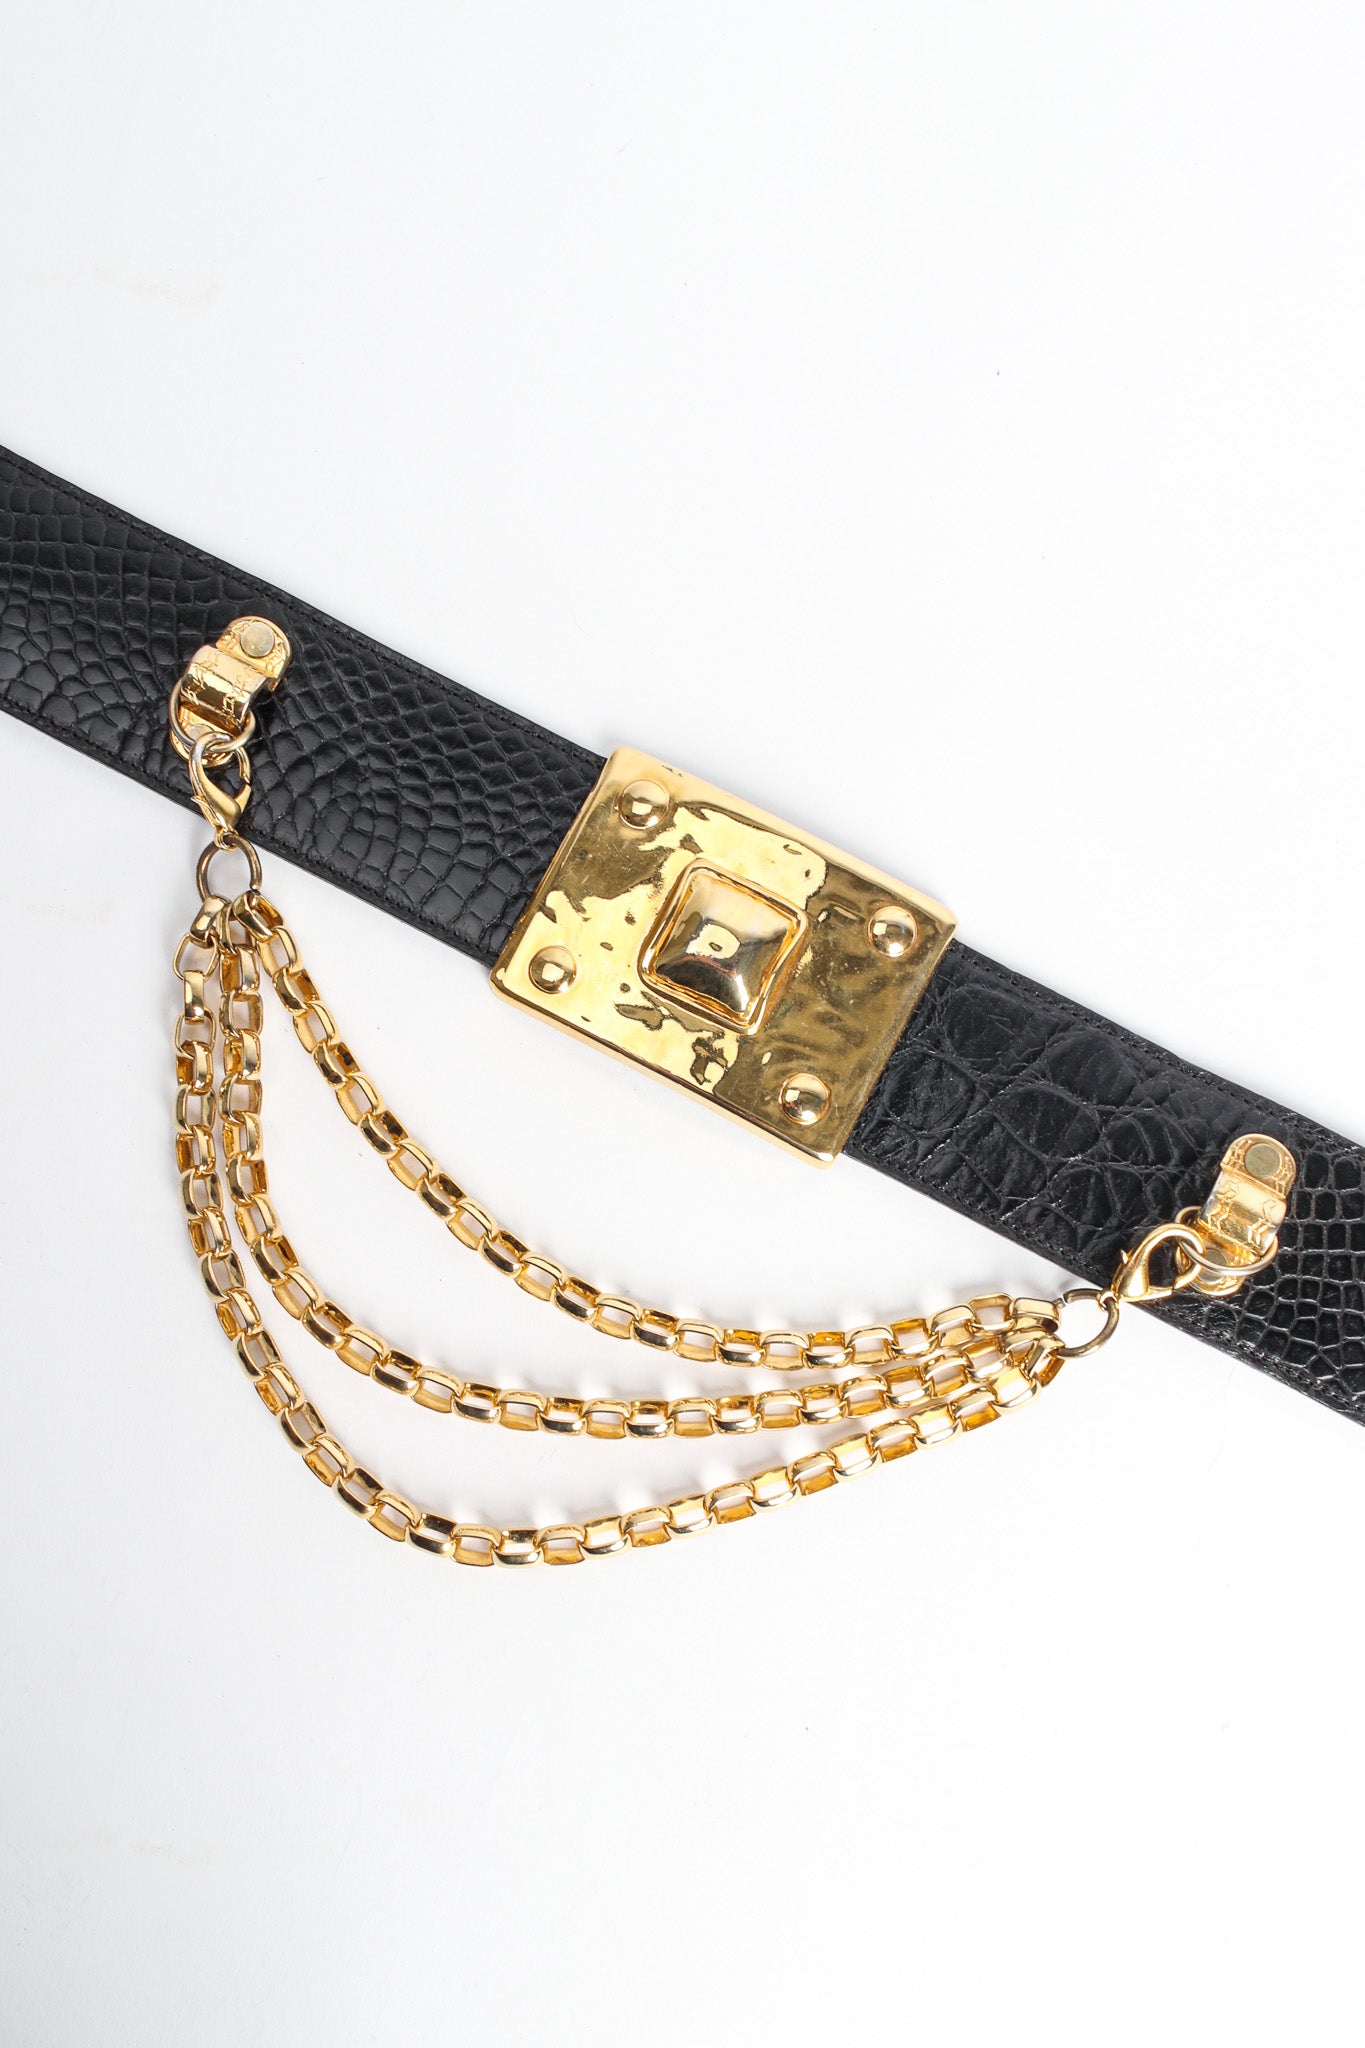 leather belt with draped chain by Streets Ahead vertical @recessla